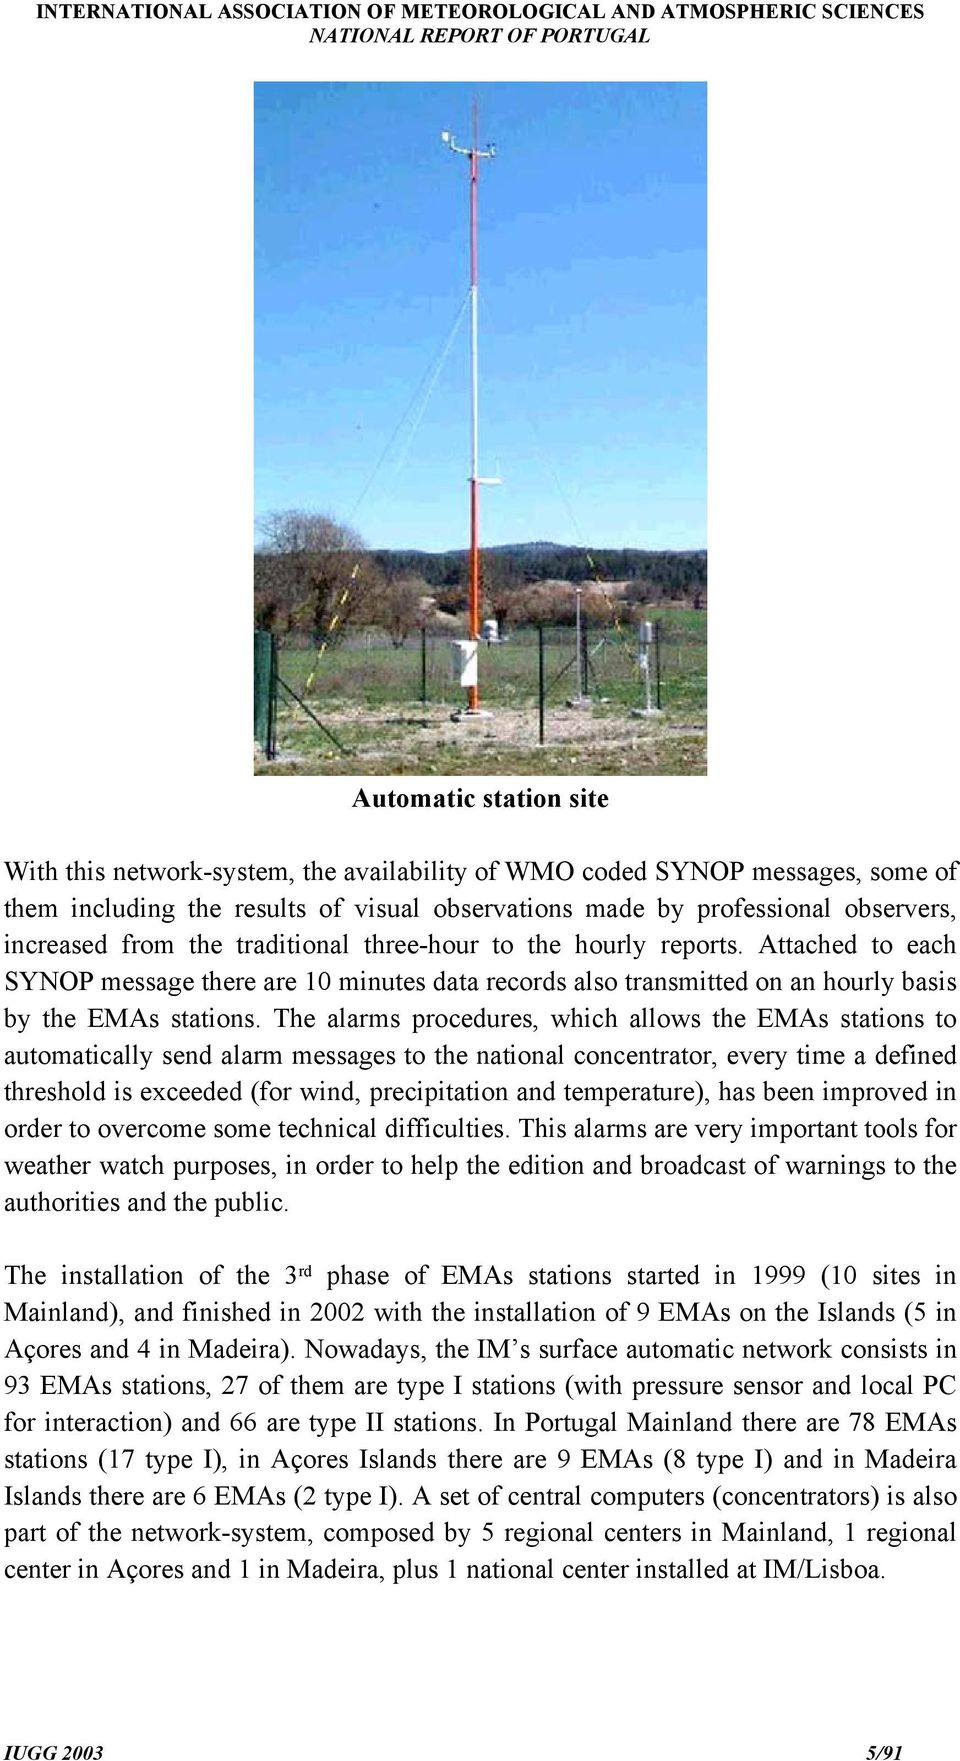 The alarms procedures, which allows the EMAs stations to automatically send alarm messages to the national concentrator, every time a defined threshold is exceeded (for wind, precipitation and